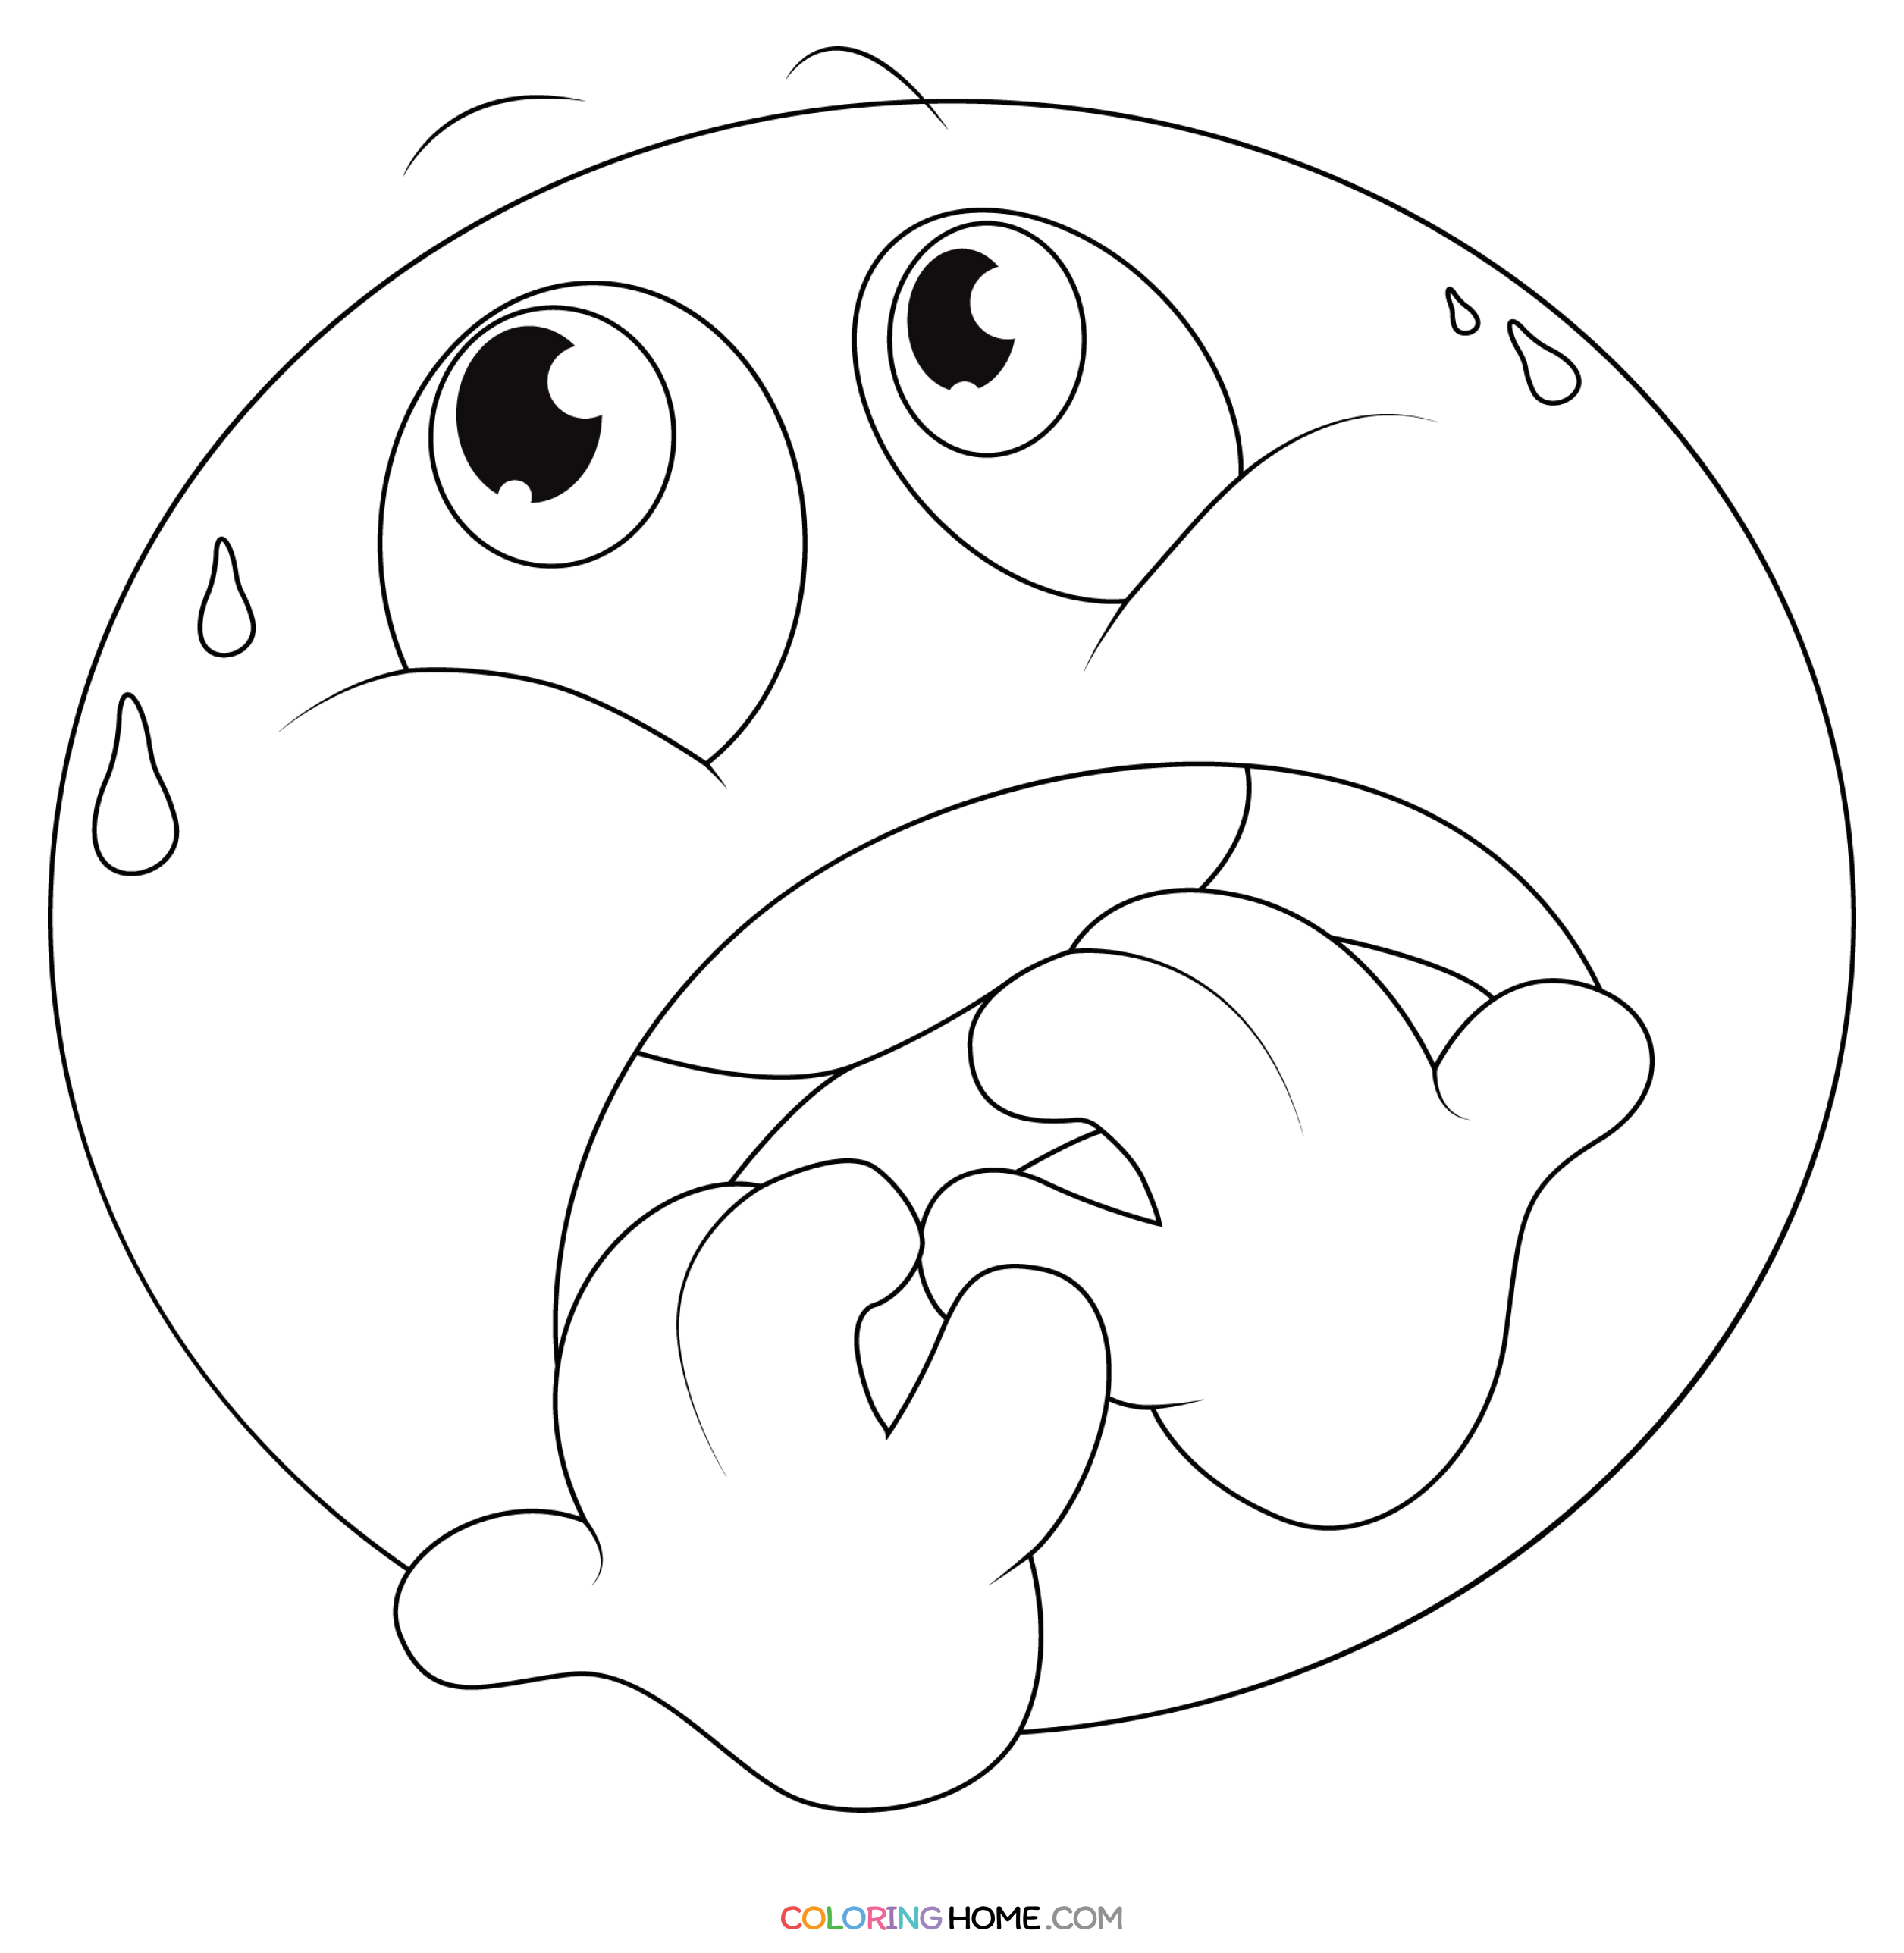 scared face coloring page